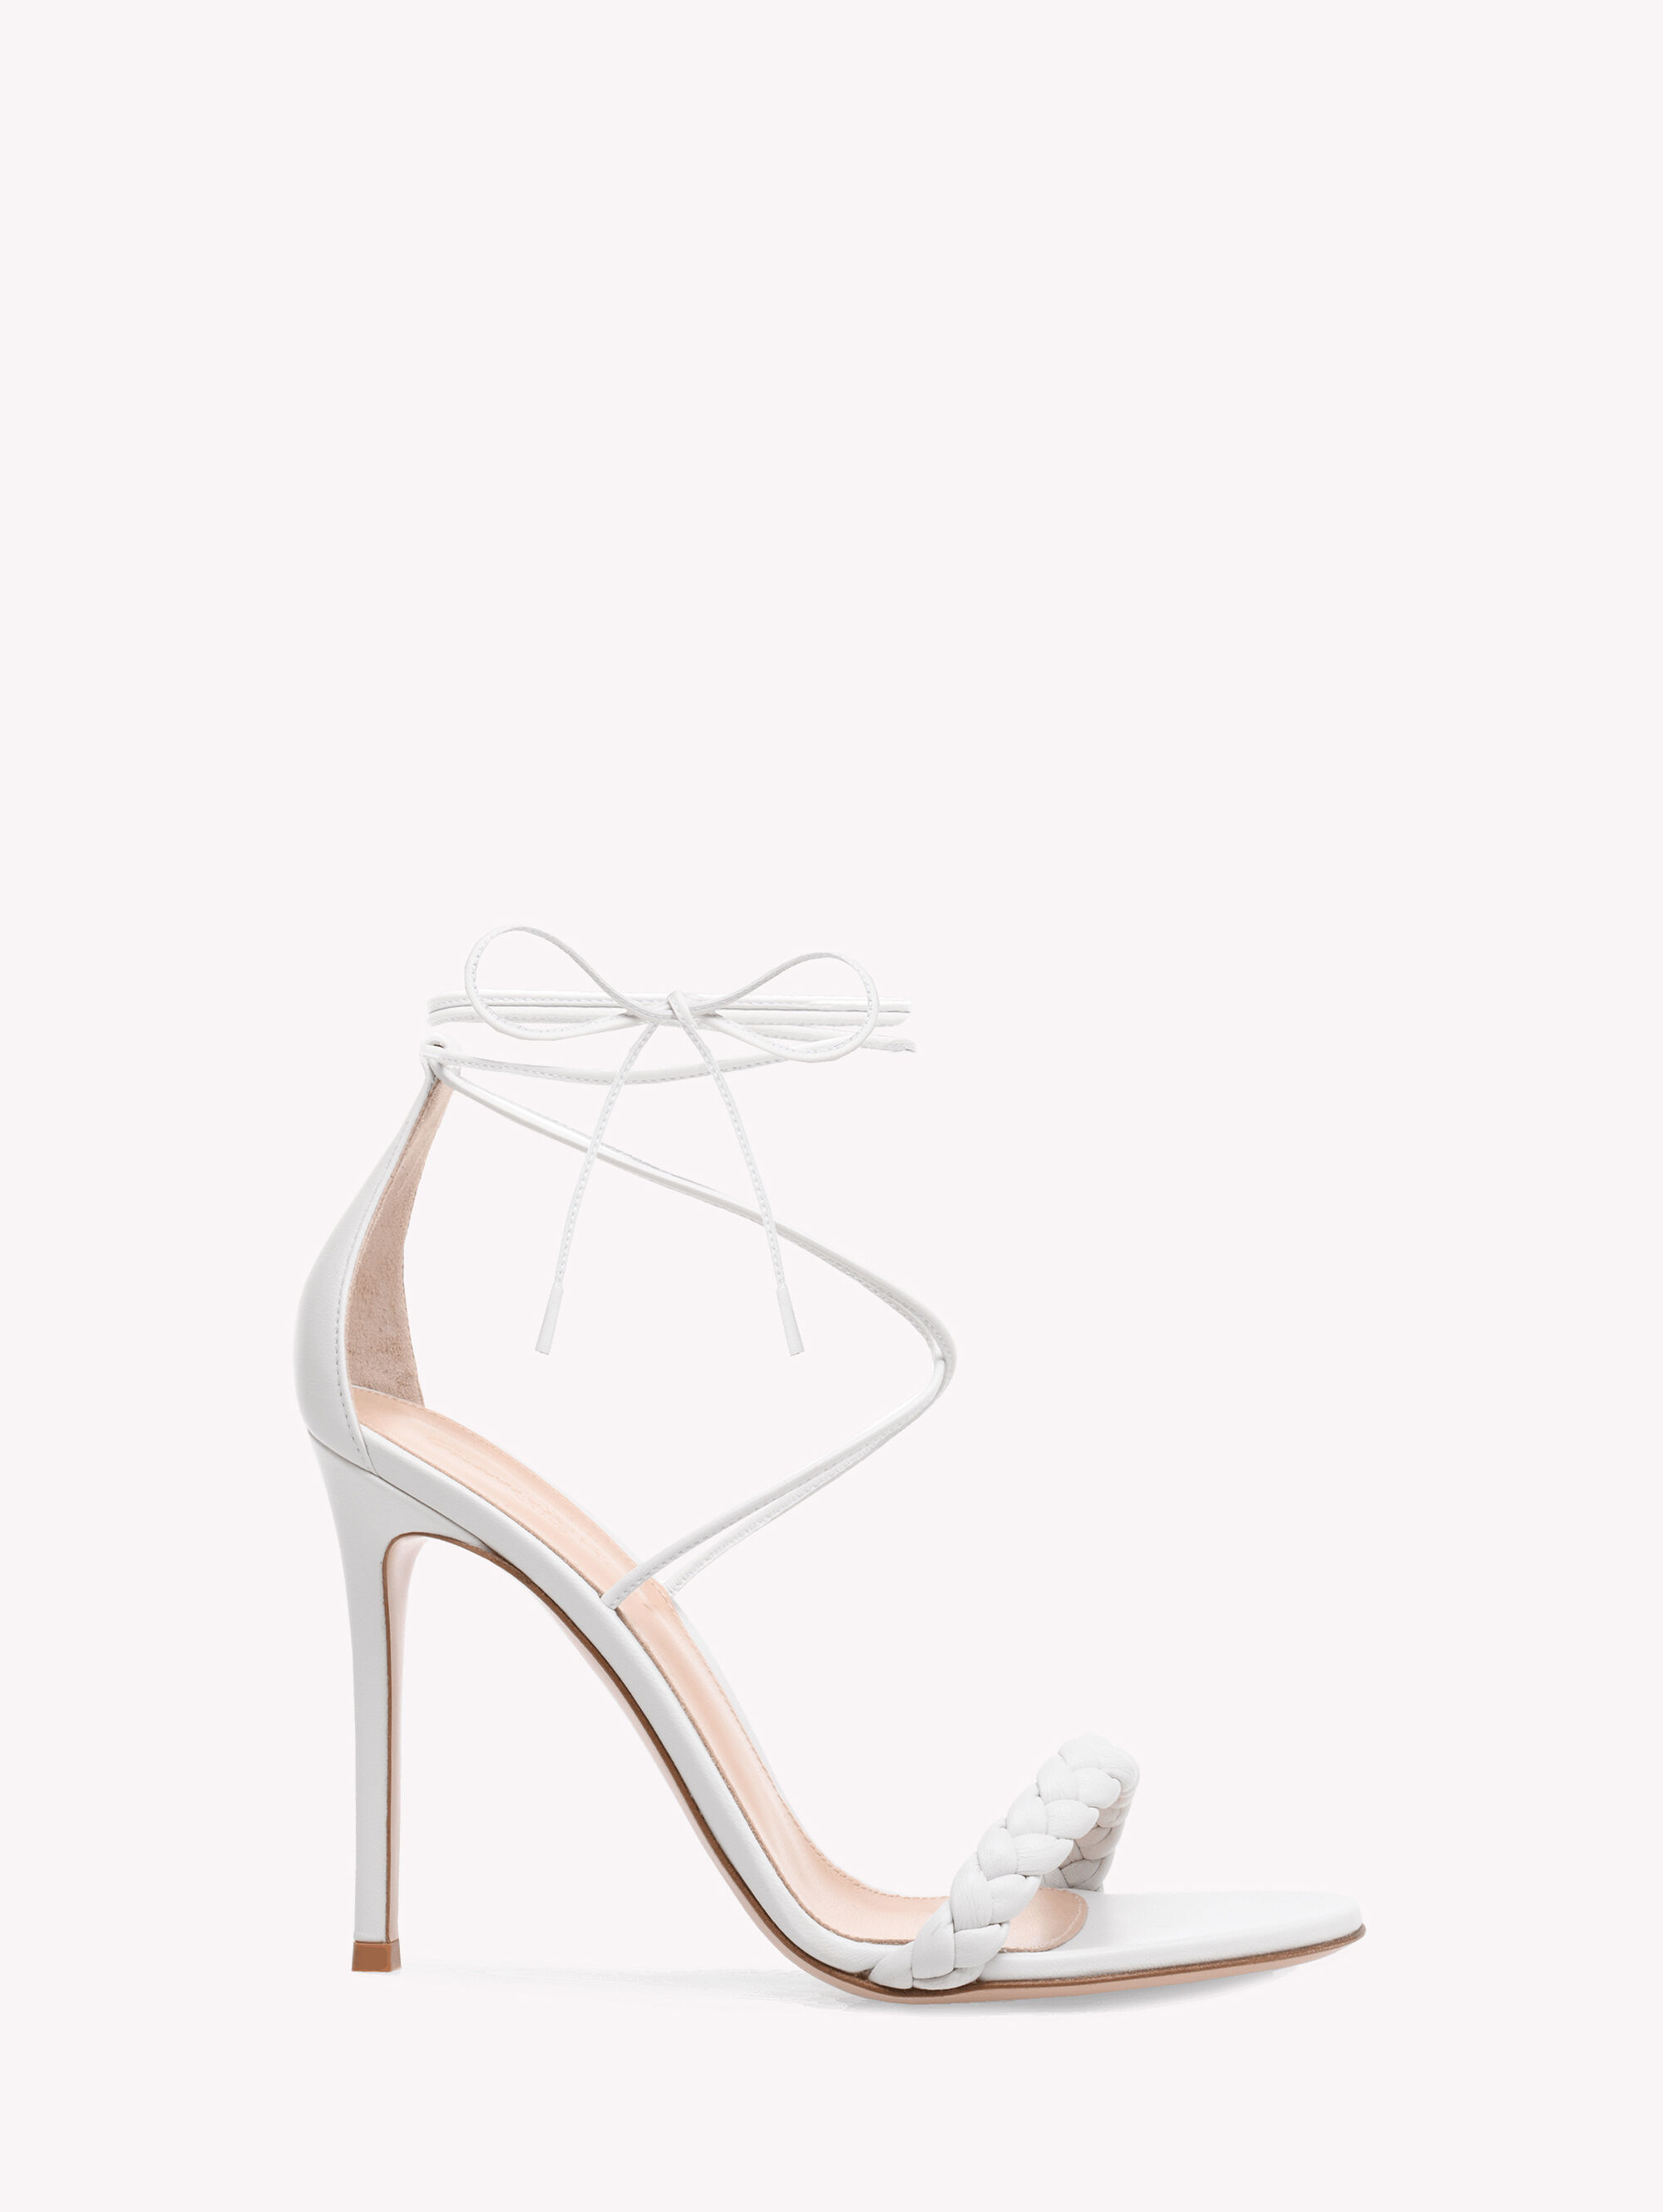 Shop Gianvito Rossi Leather Strappy Sandals | Saks Fifth Avenue